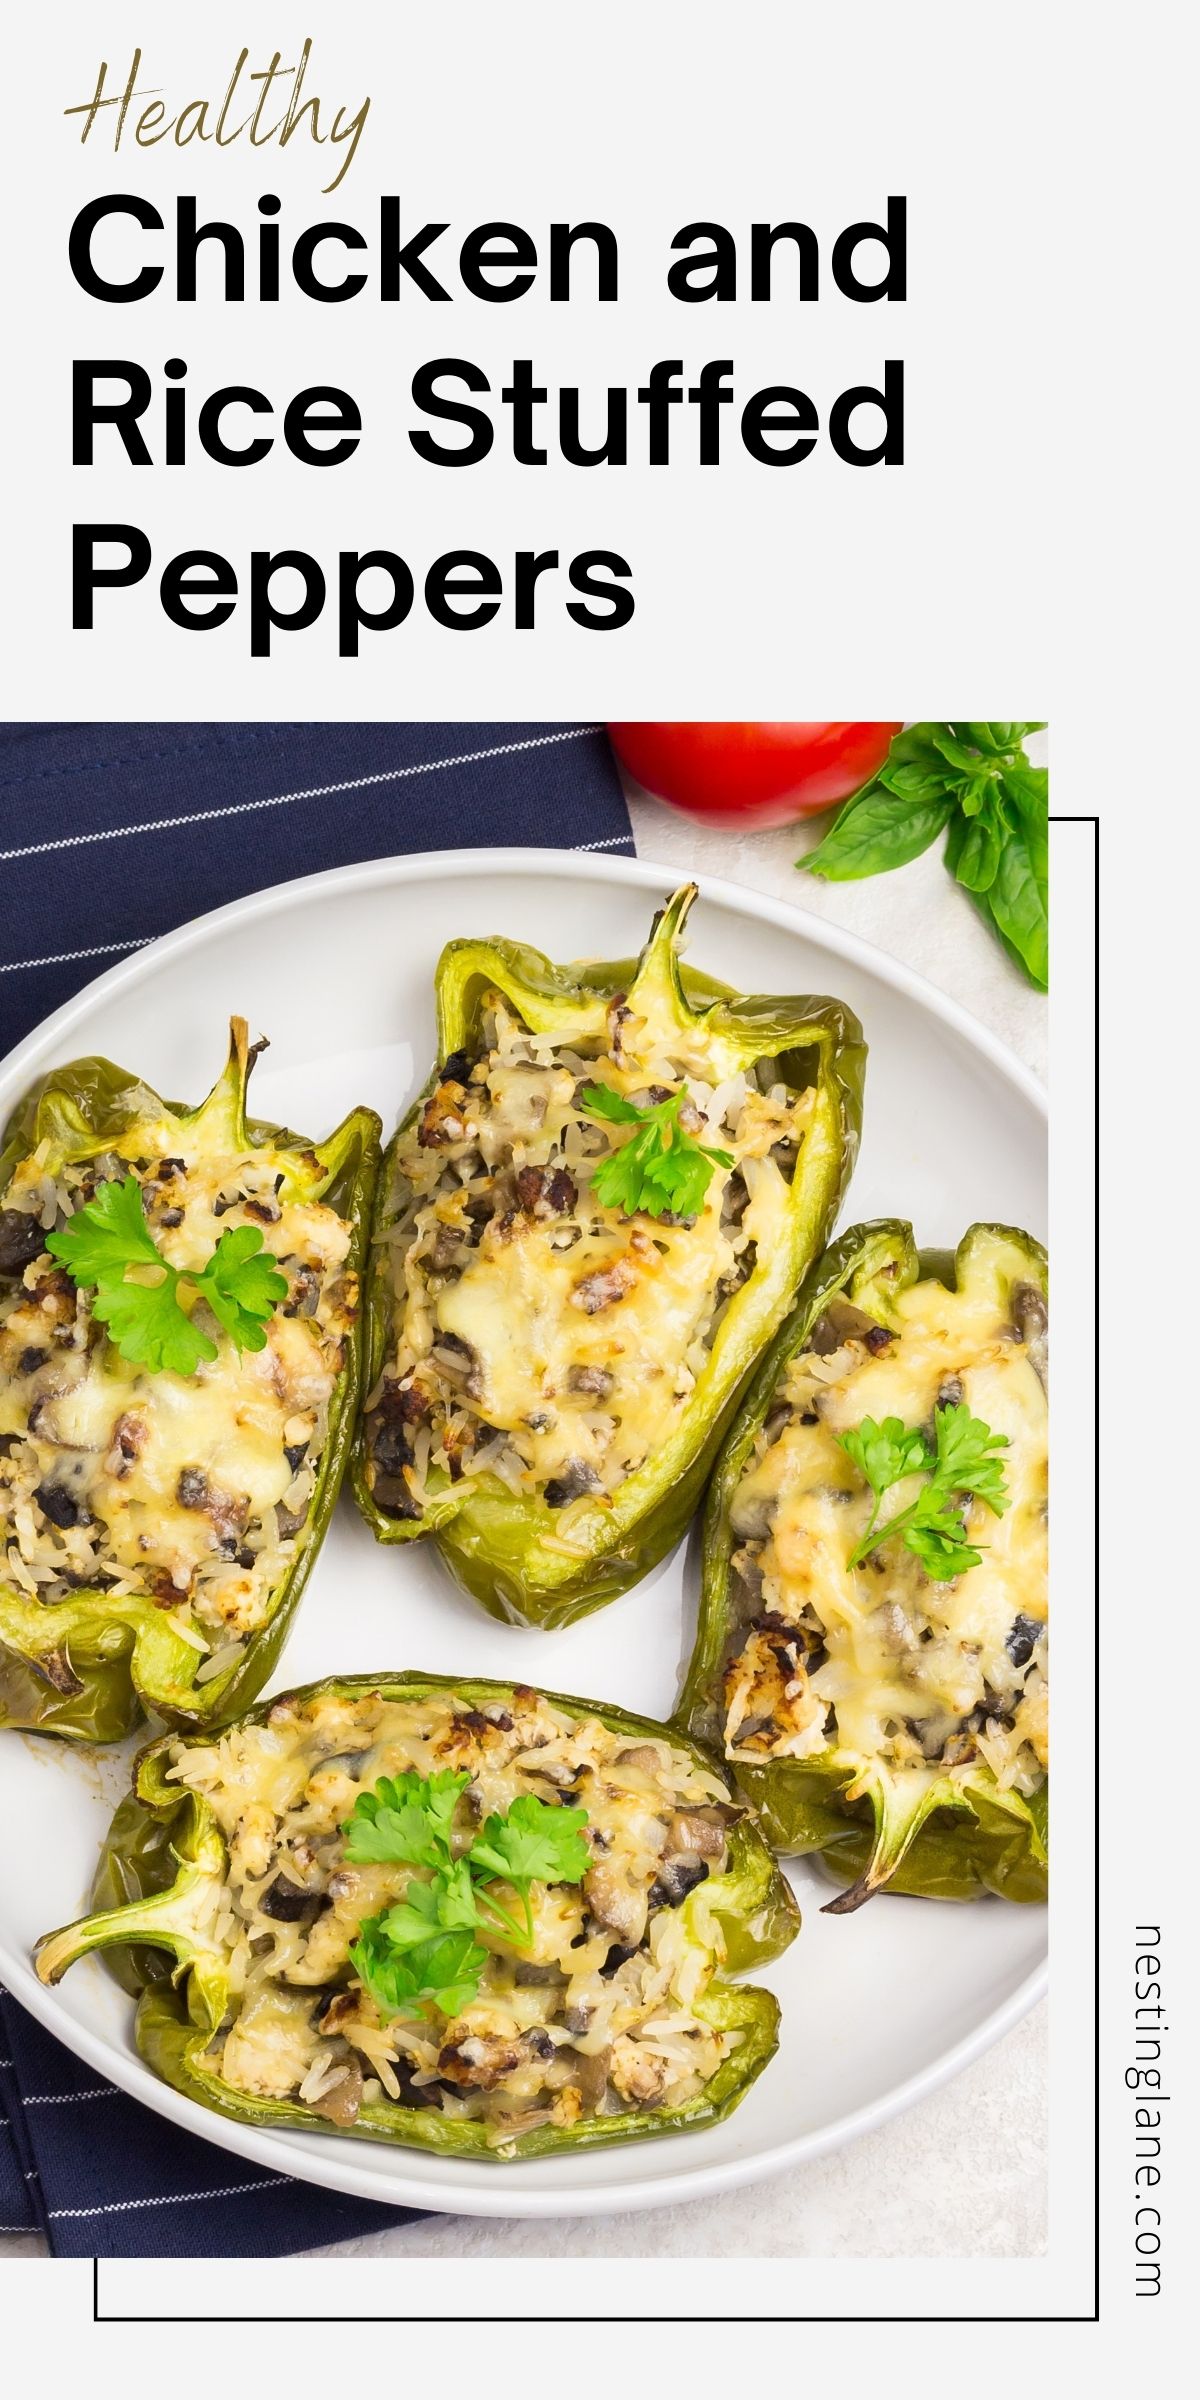 Vertical image designed for Pinterest showing a portion of the healthy chicken and rice stuffed peppers on a white plate, the text overlay reads 'Healthy Chicken and Rice Stuffed Peppers' with the website 'nestinglane.com' at the bottom.